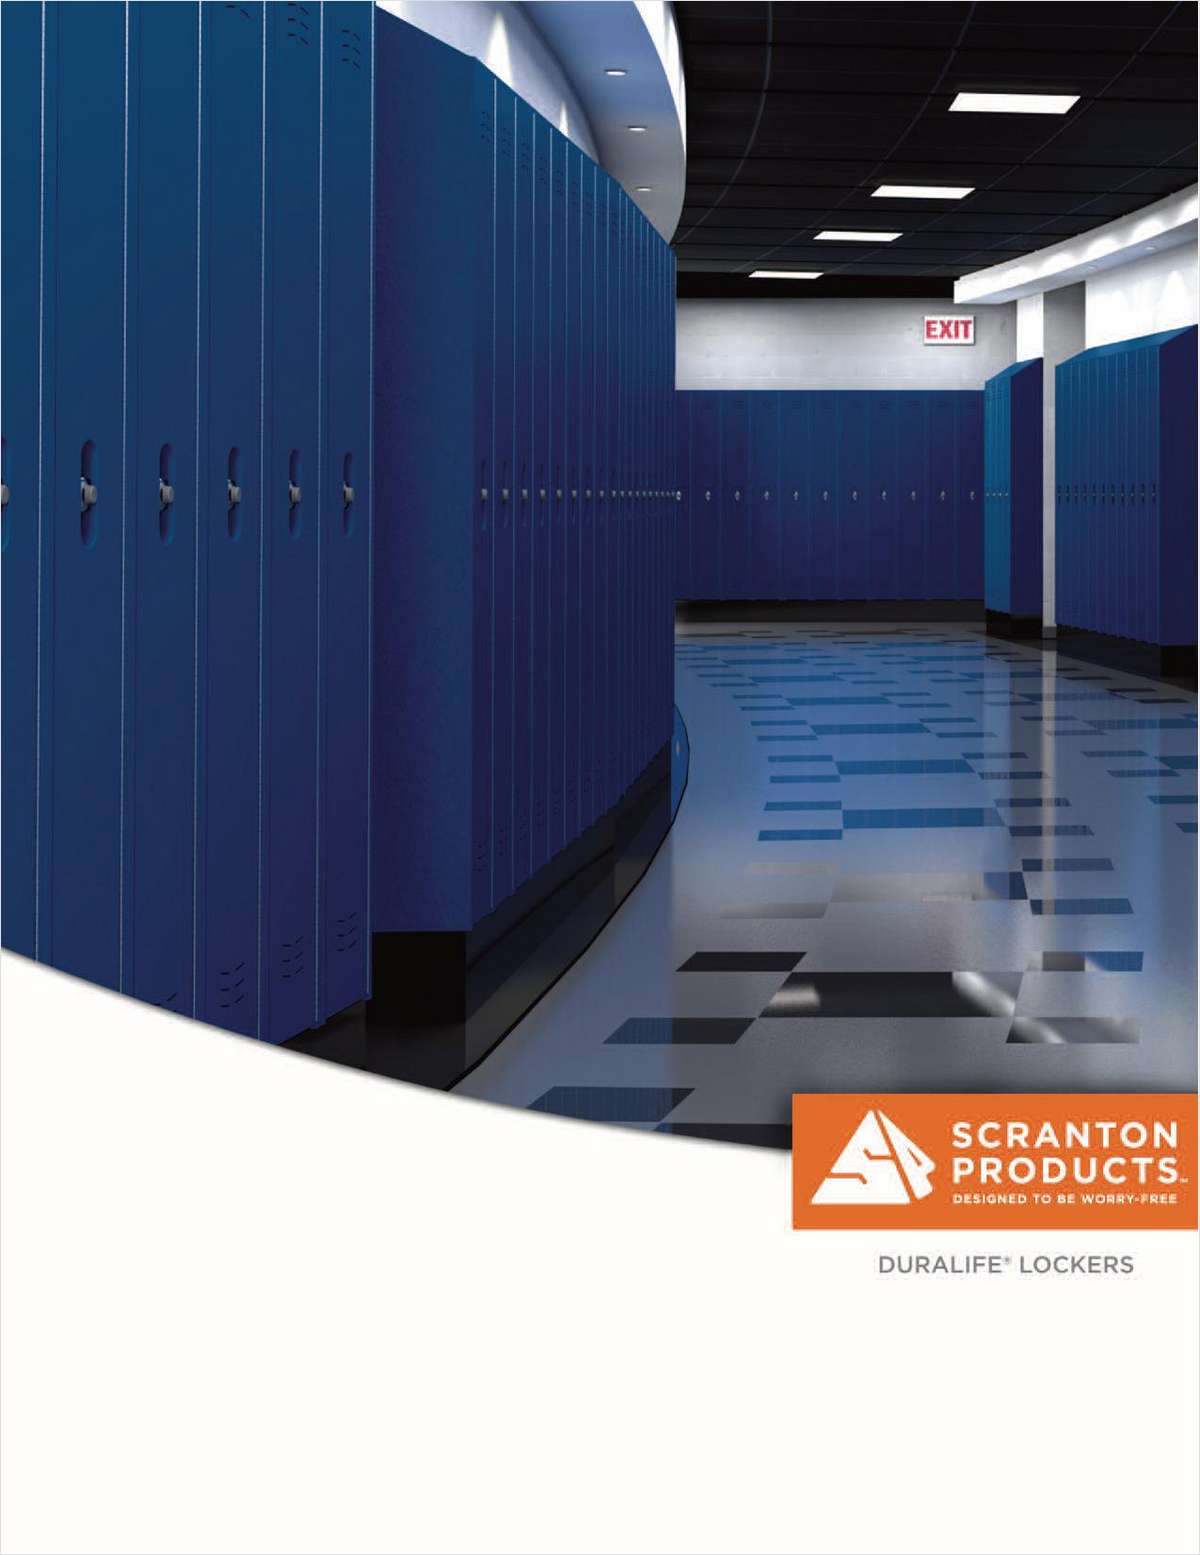 The TRUE Cost of Ownership on School Lockers - How Much Does Saving Money Up Front Cost Your School?